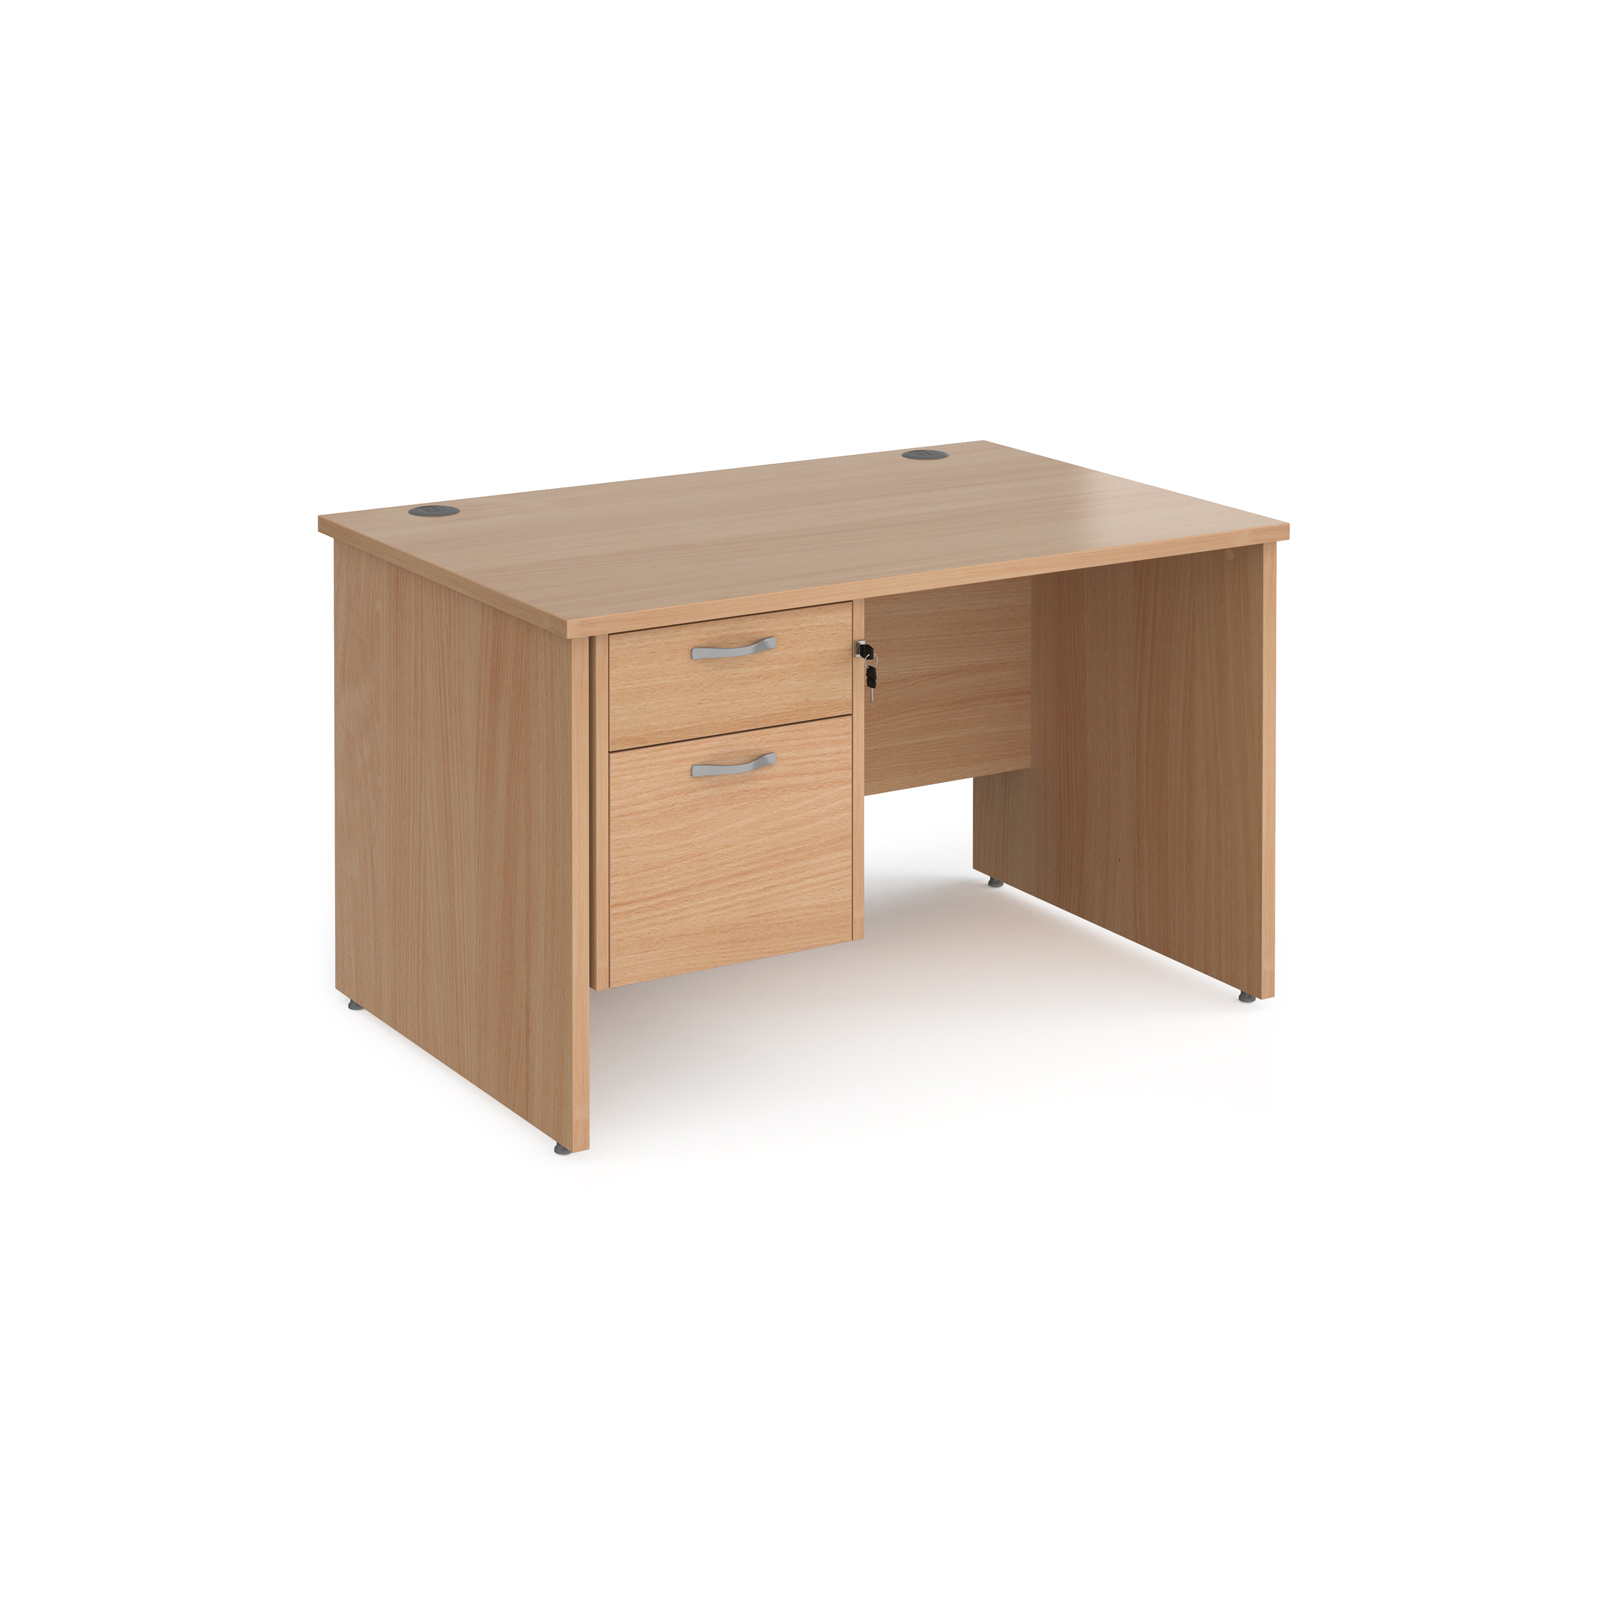 Maestro 25 straight desk 1200mm x 800mm with 2 drawer pedestal - beech top with panel end leg